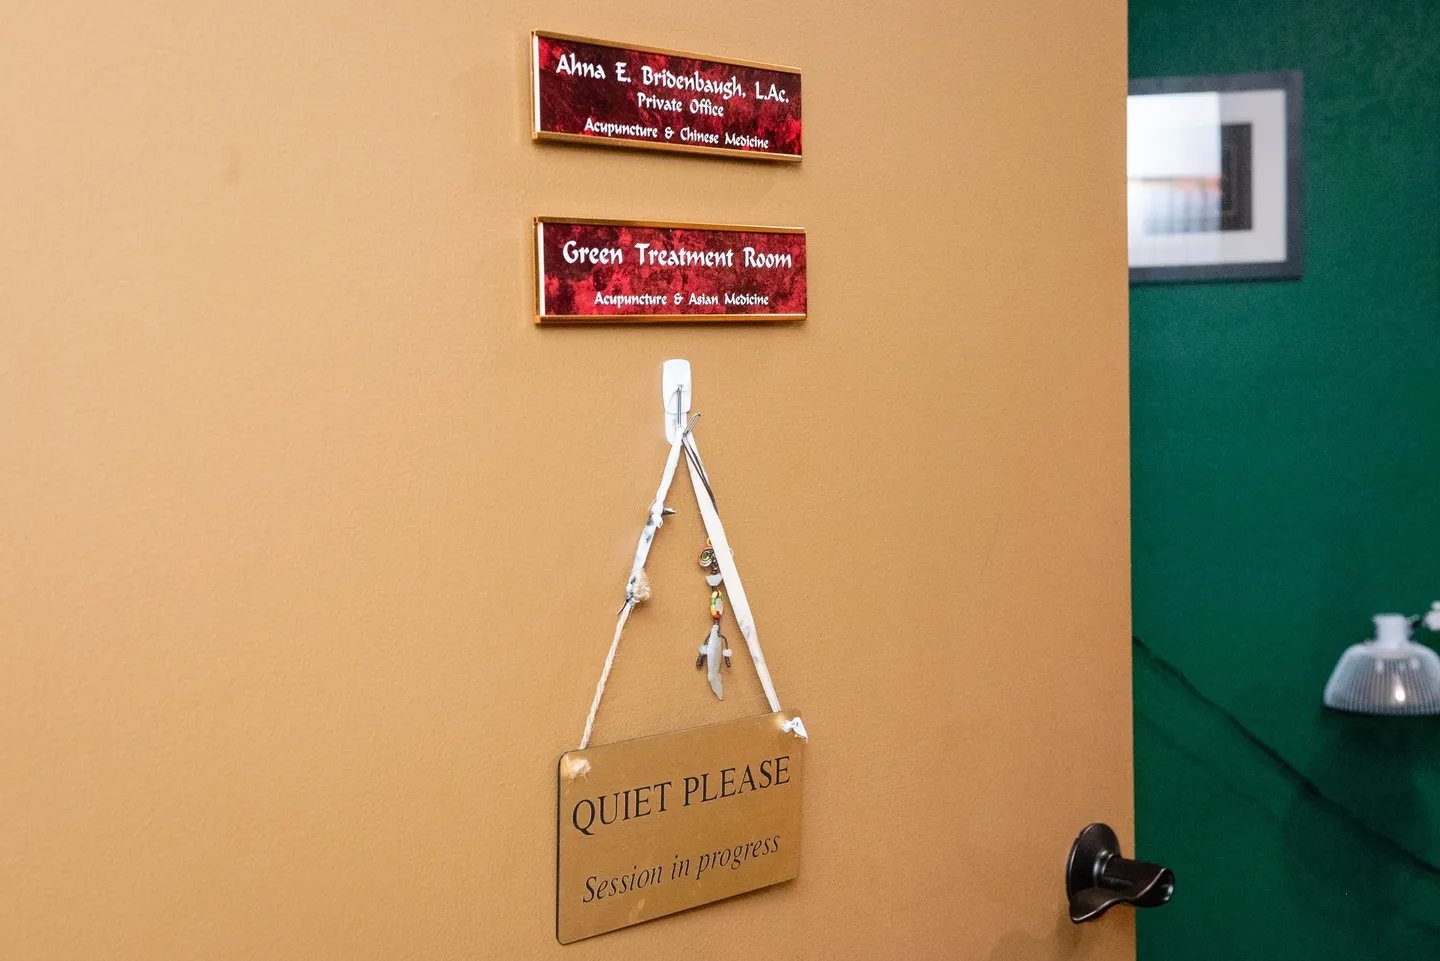 Entrance to the Green Treatment Room.